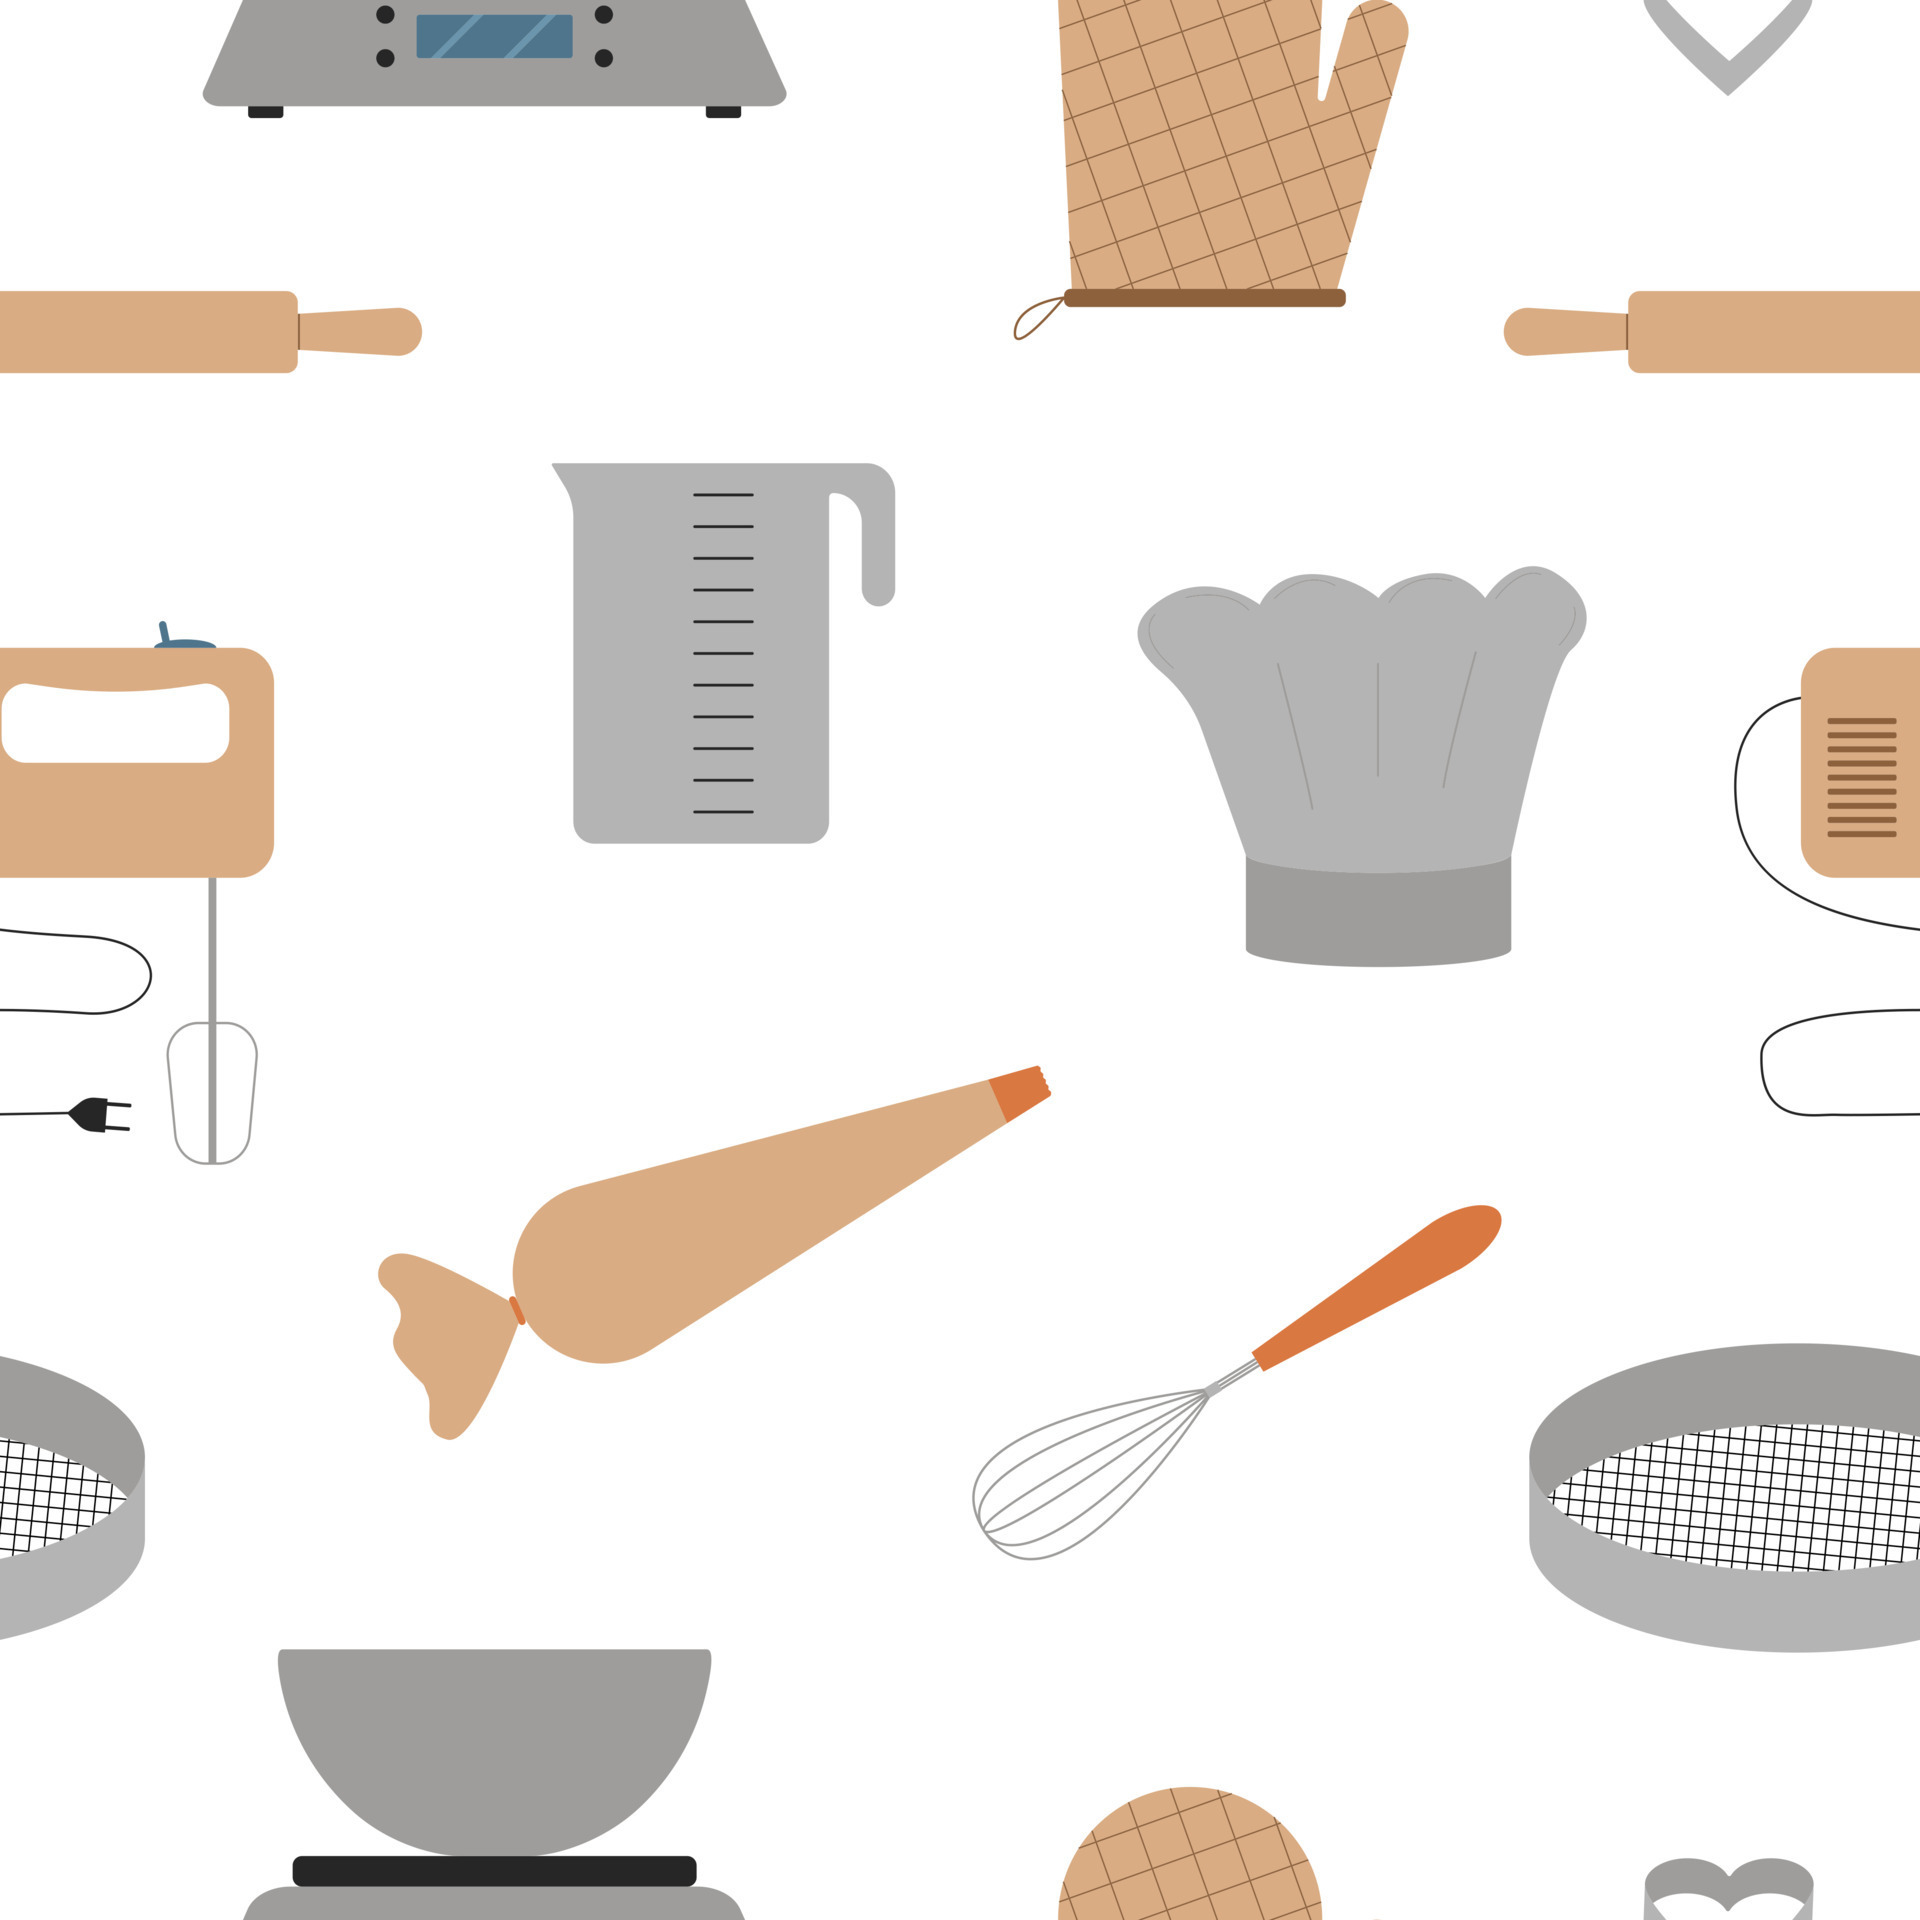 https://static.vecteezy.com/system/resources/previews/013/522/760/original/seamless-pattern-with-baking-tools-cooking-equipment-flat-style-illustration-vector.jpg